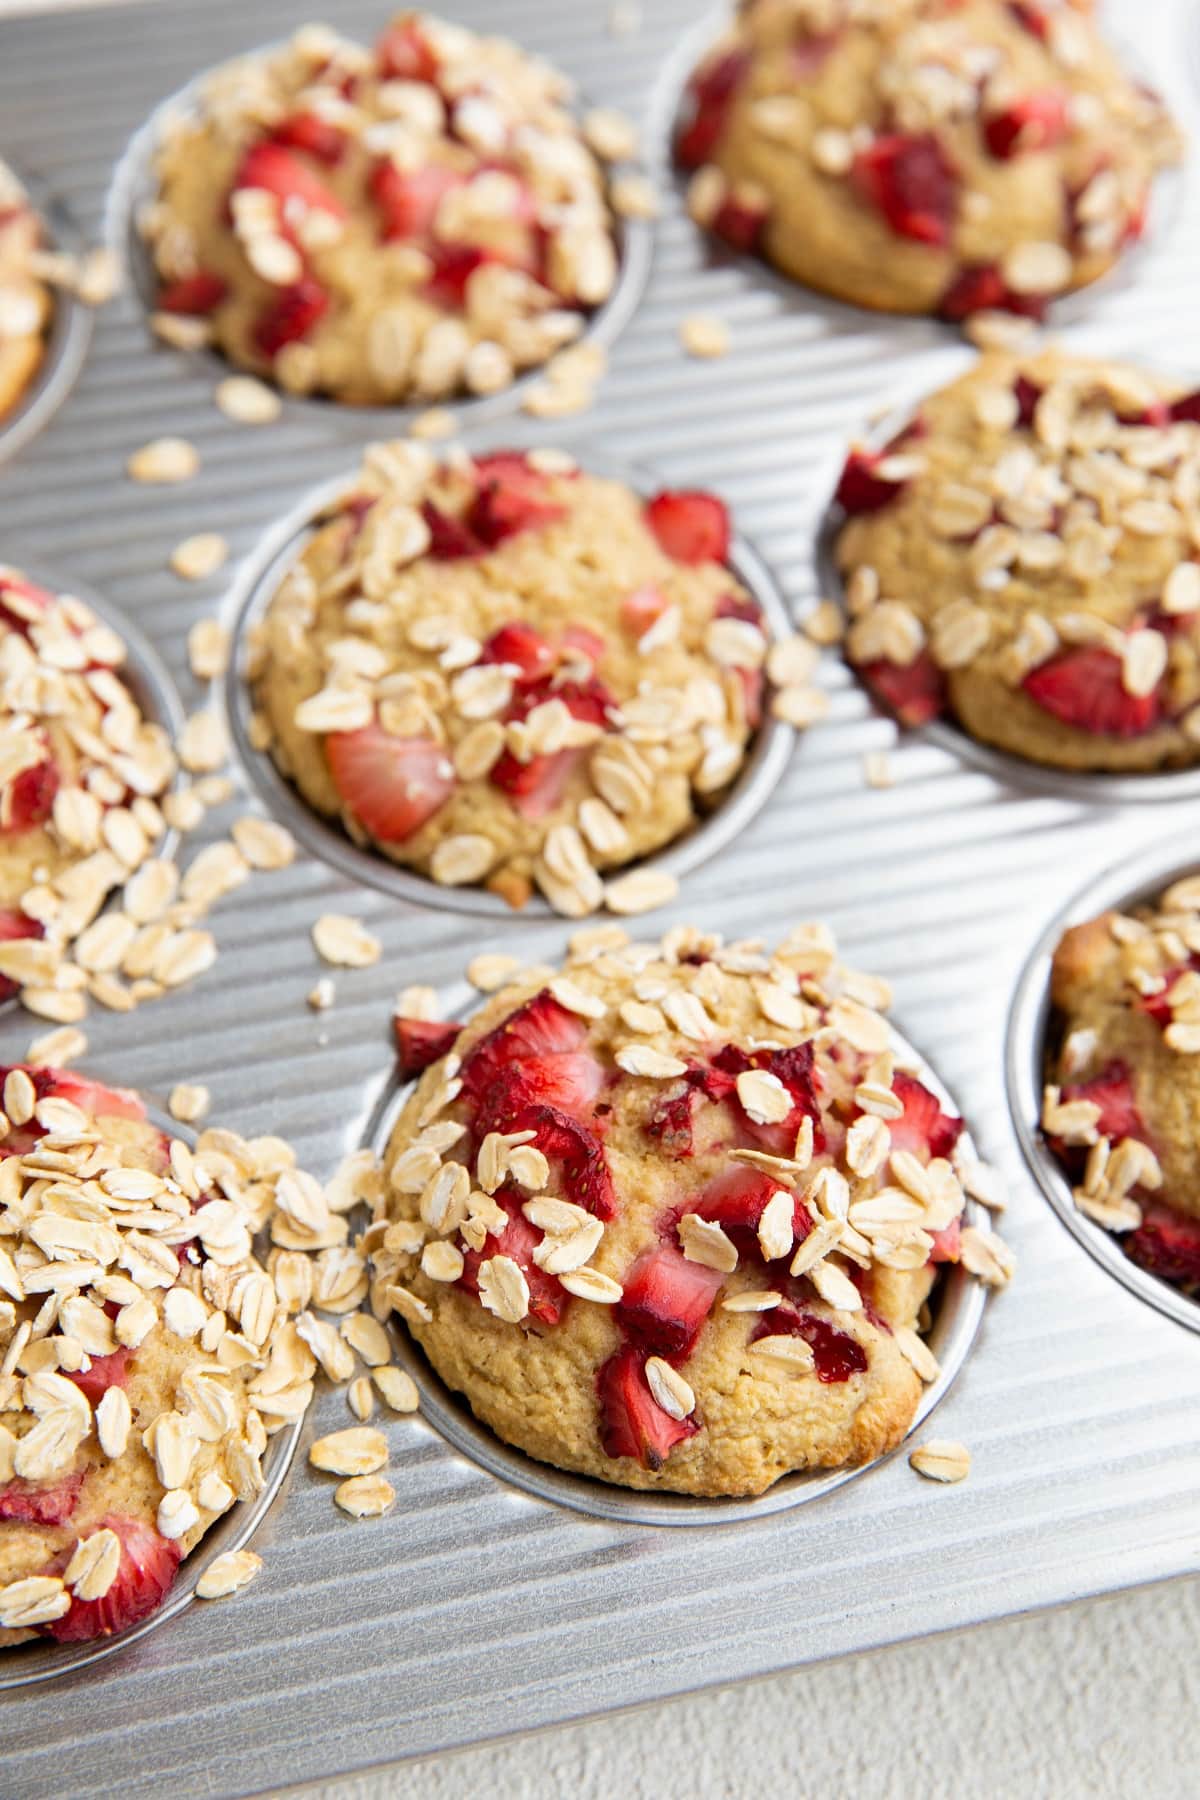 Strawberry oatmeal muffins in a muffin tin, fresh out of the oven.